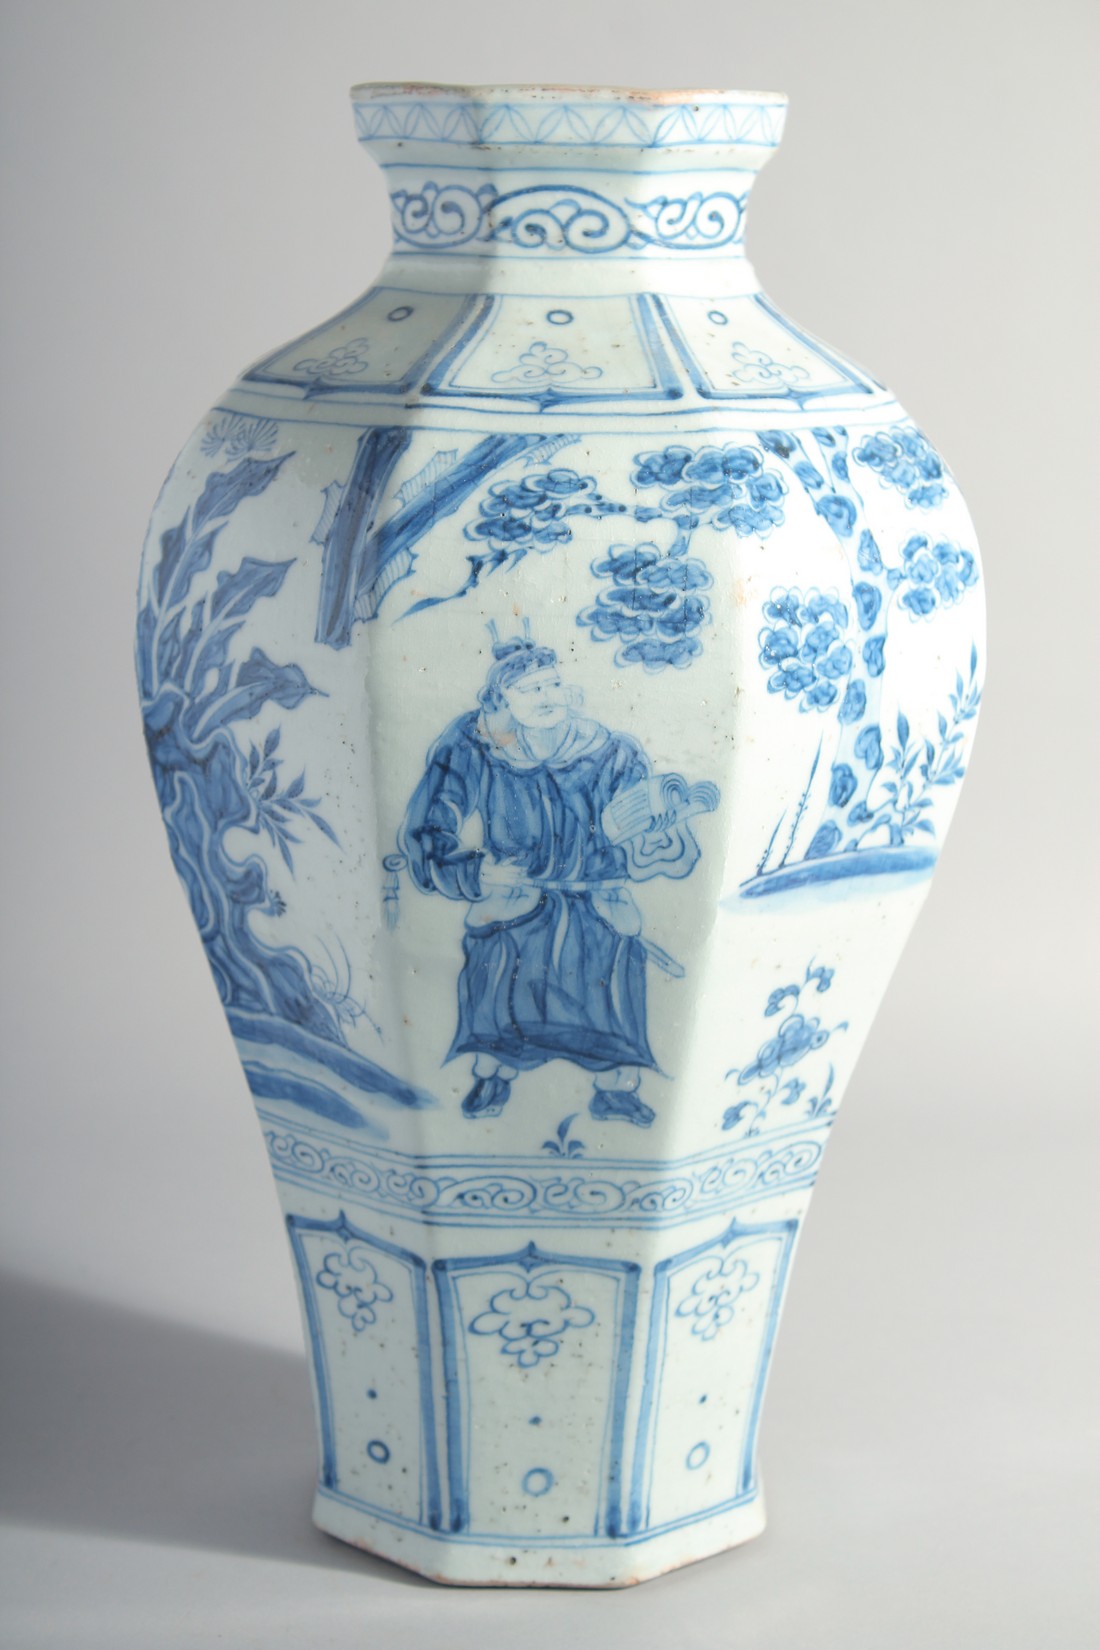 A LARGE CHINESE BLUE AND WHITE GLAZED POTTERY VASE, painted with figures and flora, 42cm high. - Image 2 of 6